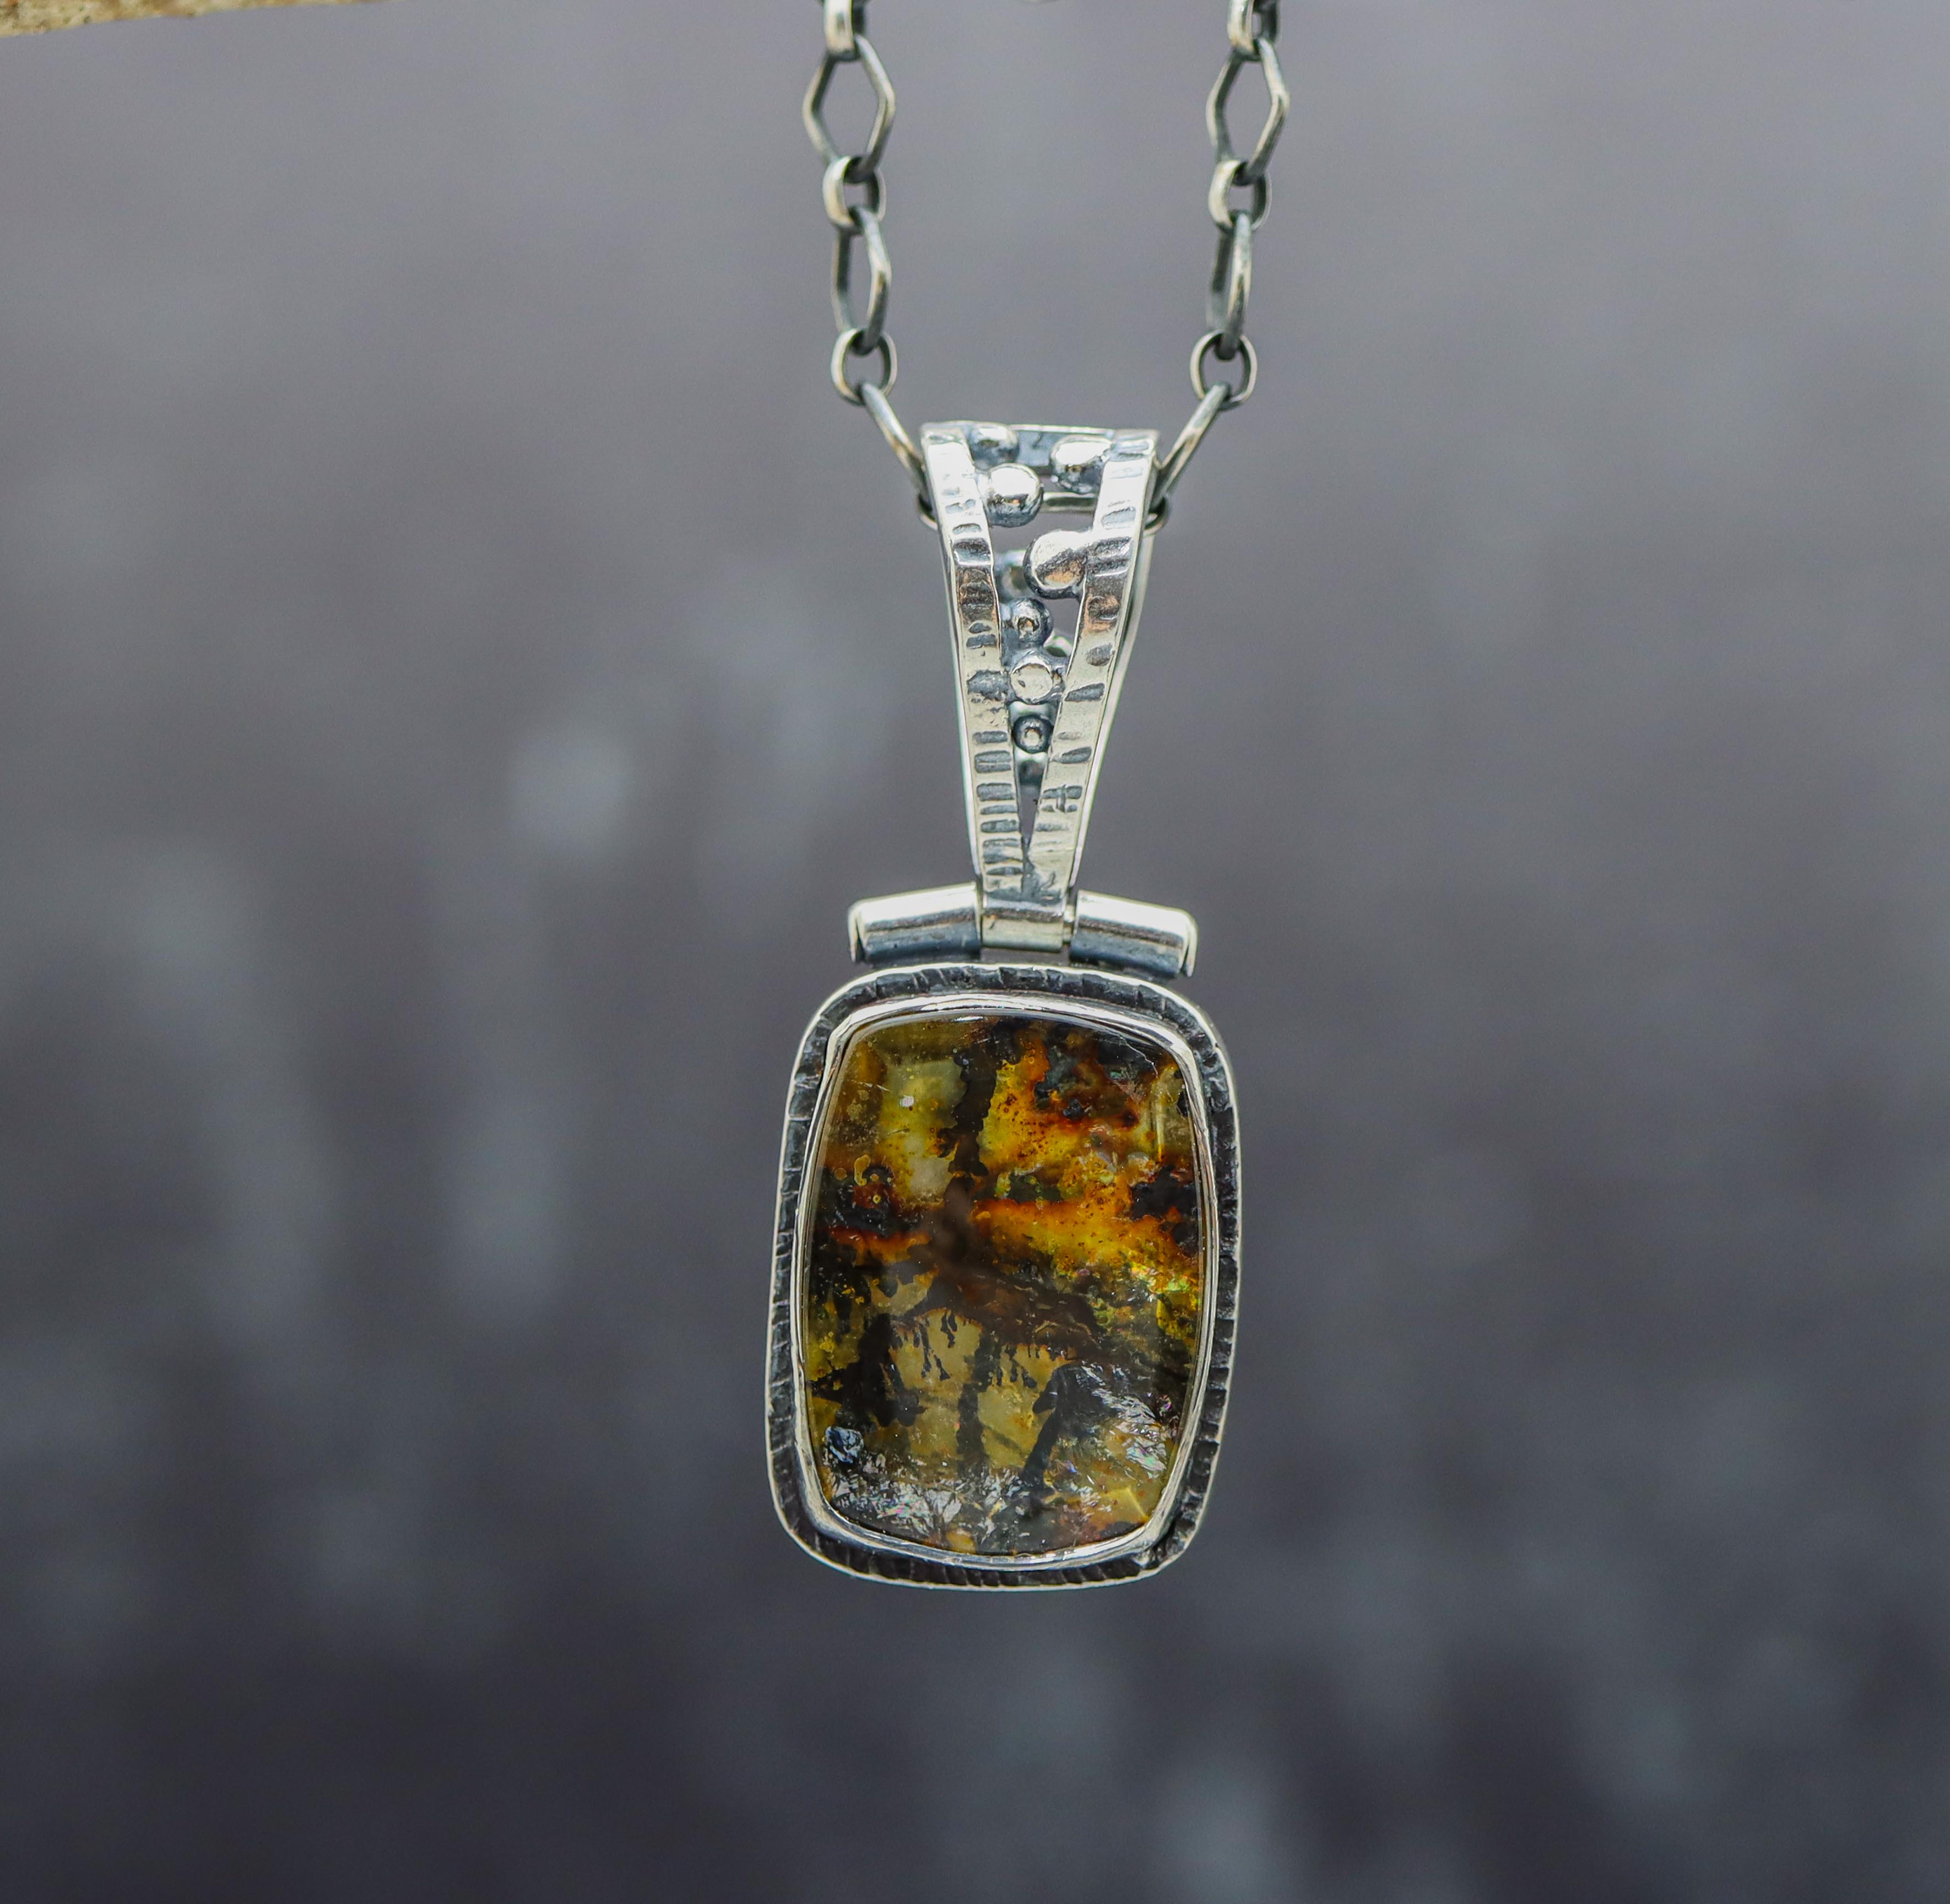 Dendritic Quartz Pendant Sterling Silver One Of a Kind Gemstone Necklace